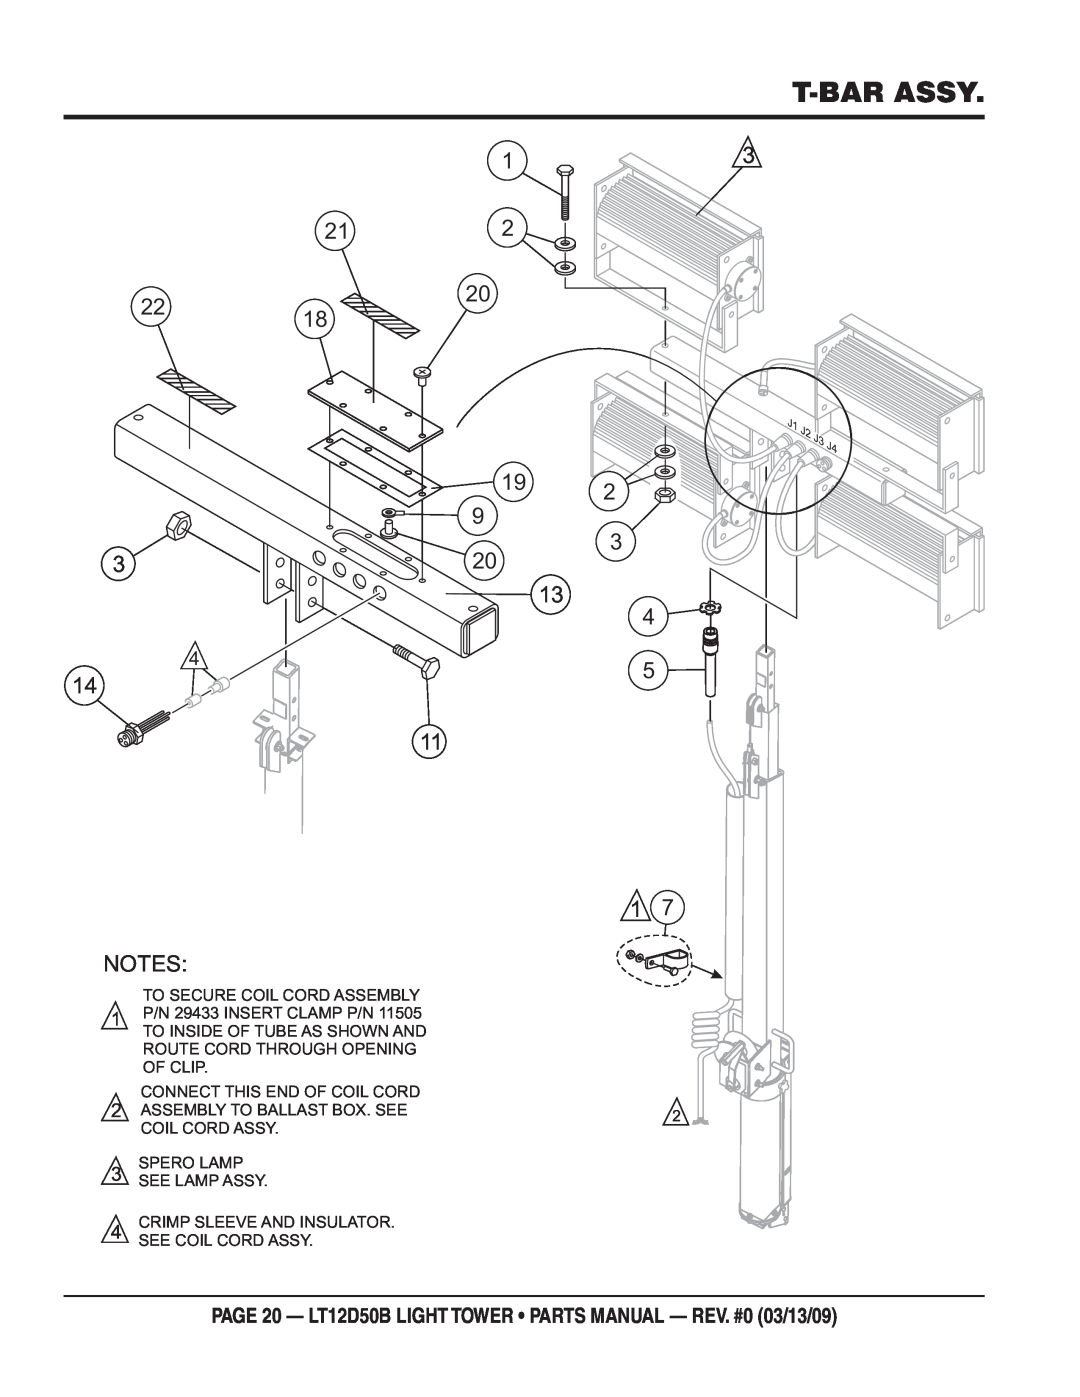 Multiquip T-Bar Assy, PAGE 20 - LT12D50B LIGHT TOWER PARTS MANUAL - REV. #0 03/13/09, Connect This End Of Coil Cord 